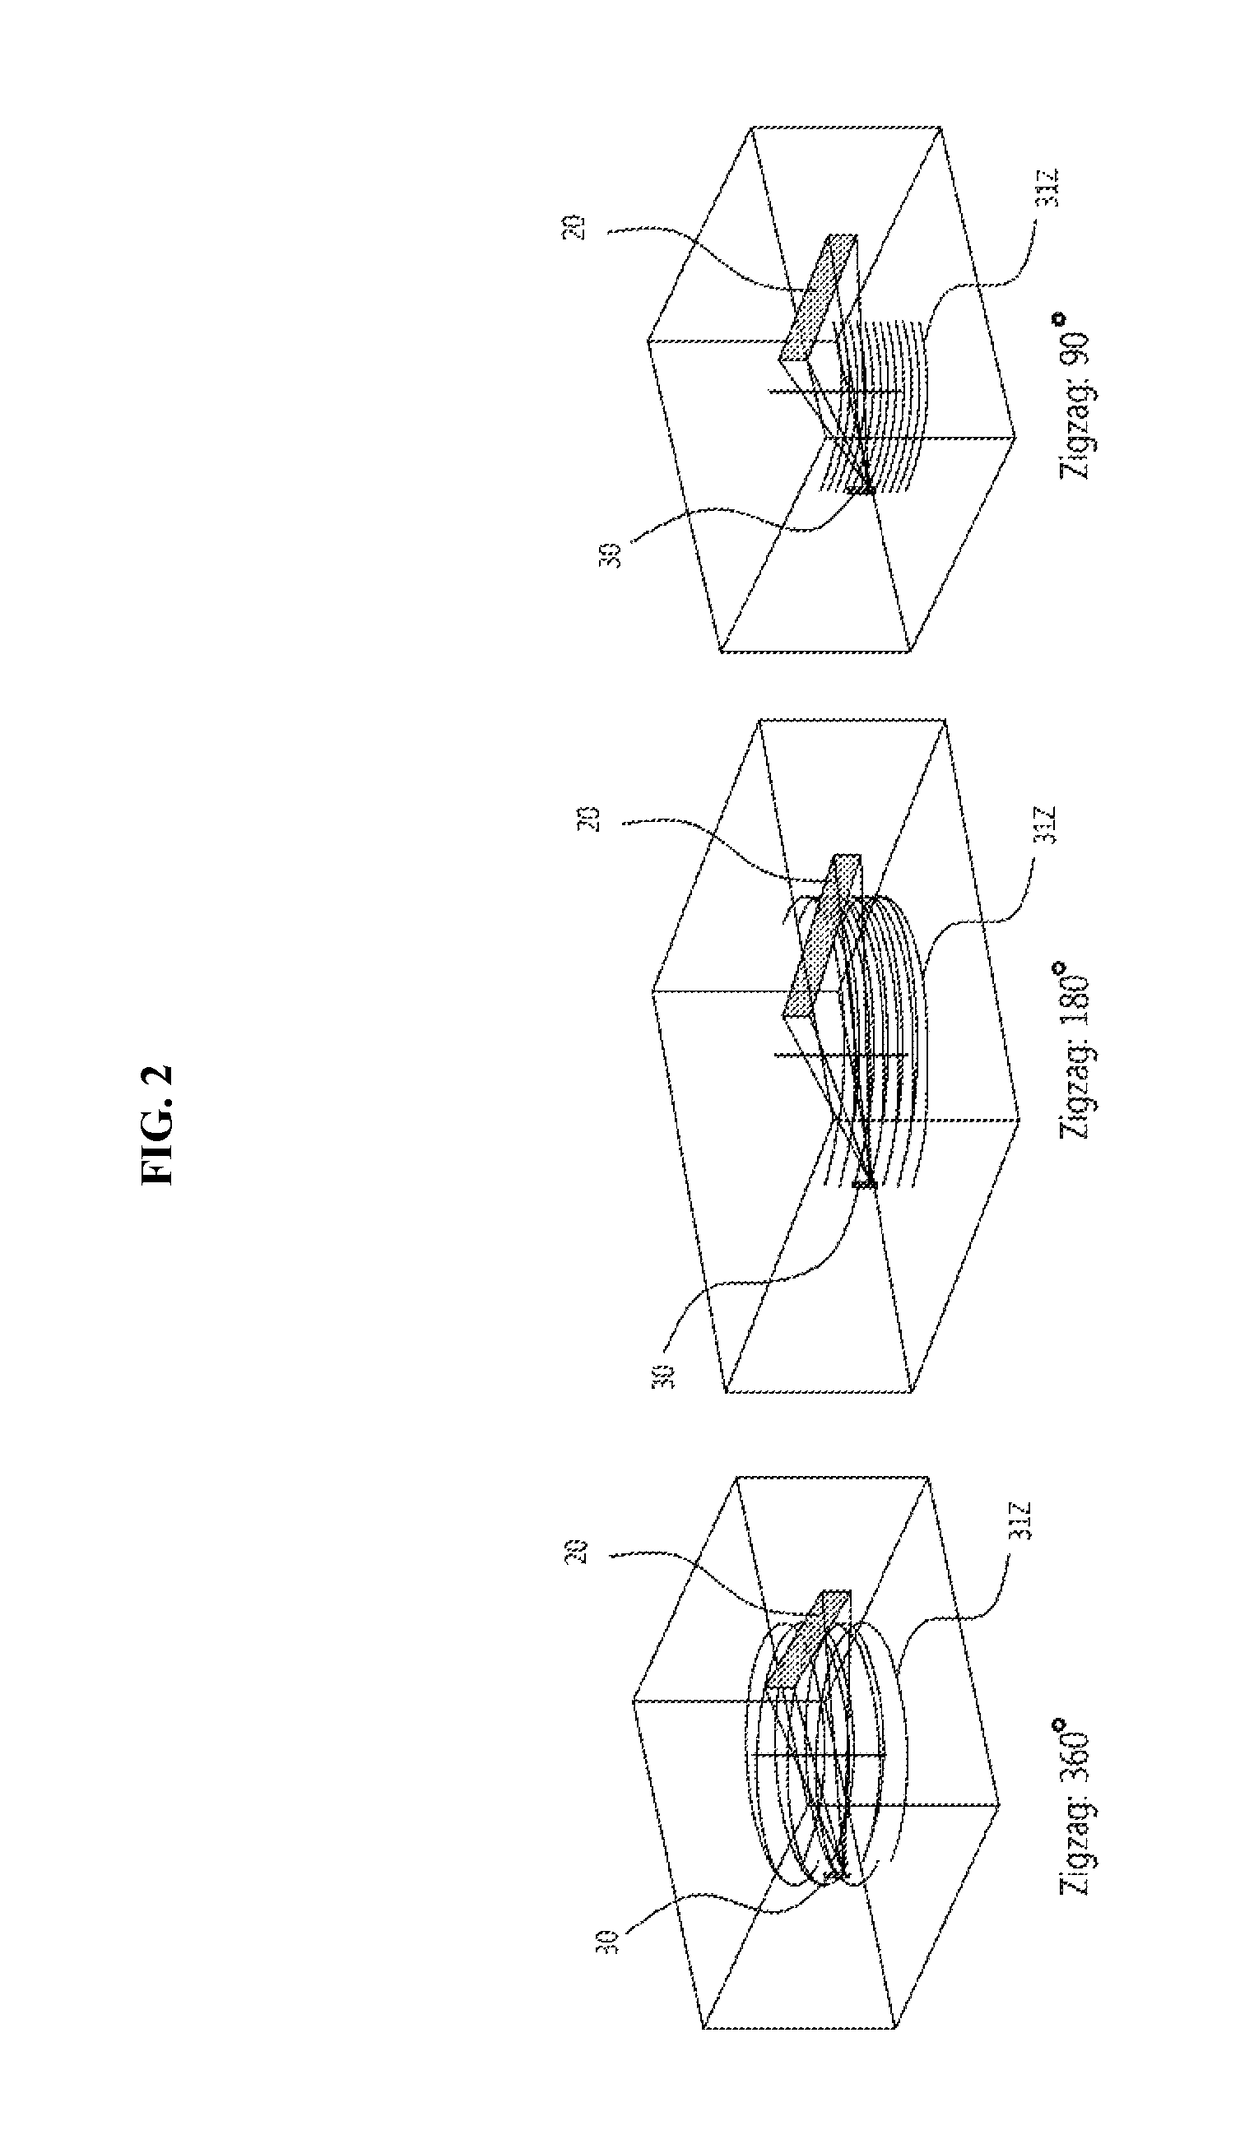 Apparatus and method for obtaining computed tomography